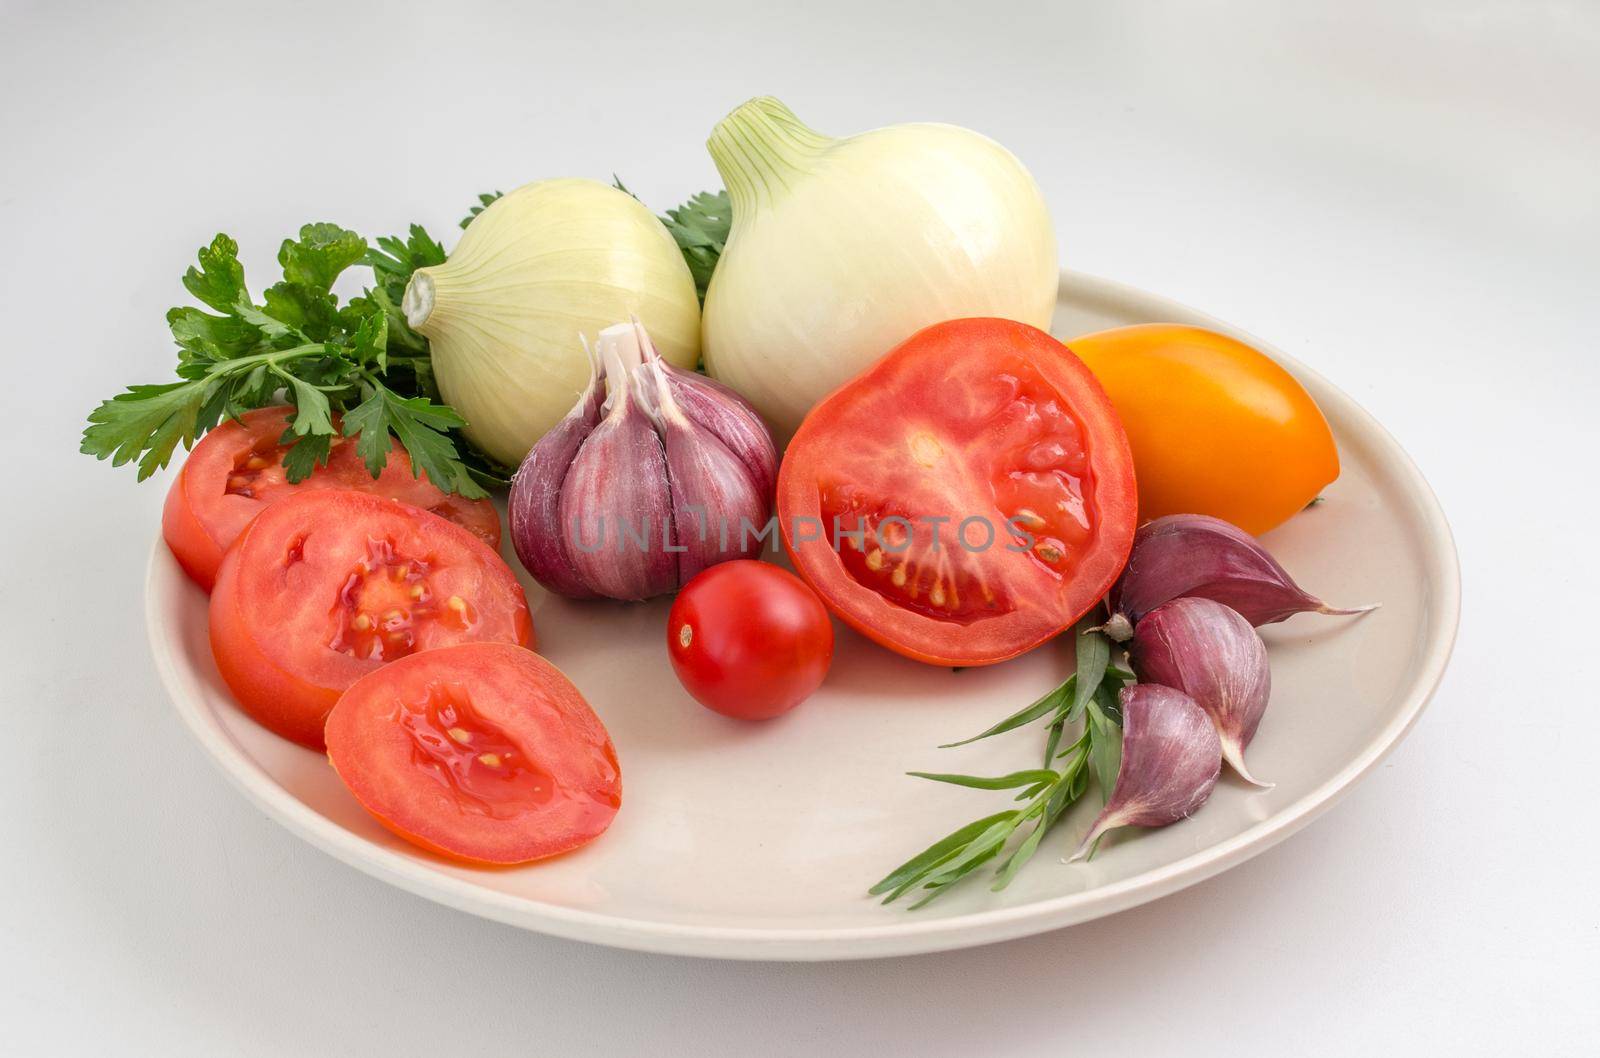 Tomatoes, garlic, onions and greens on a plate.